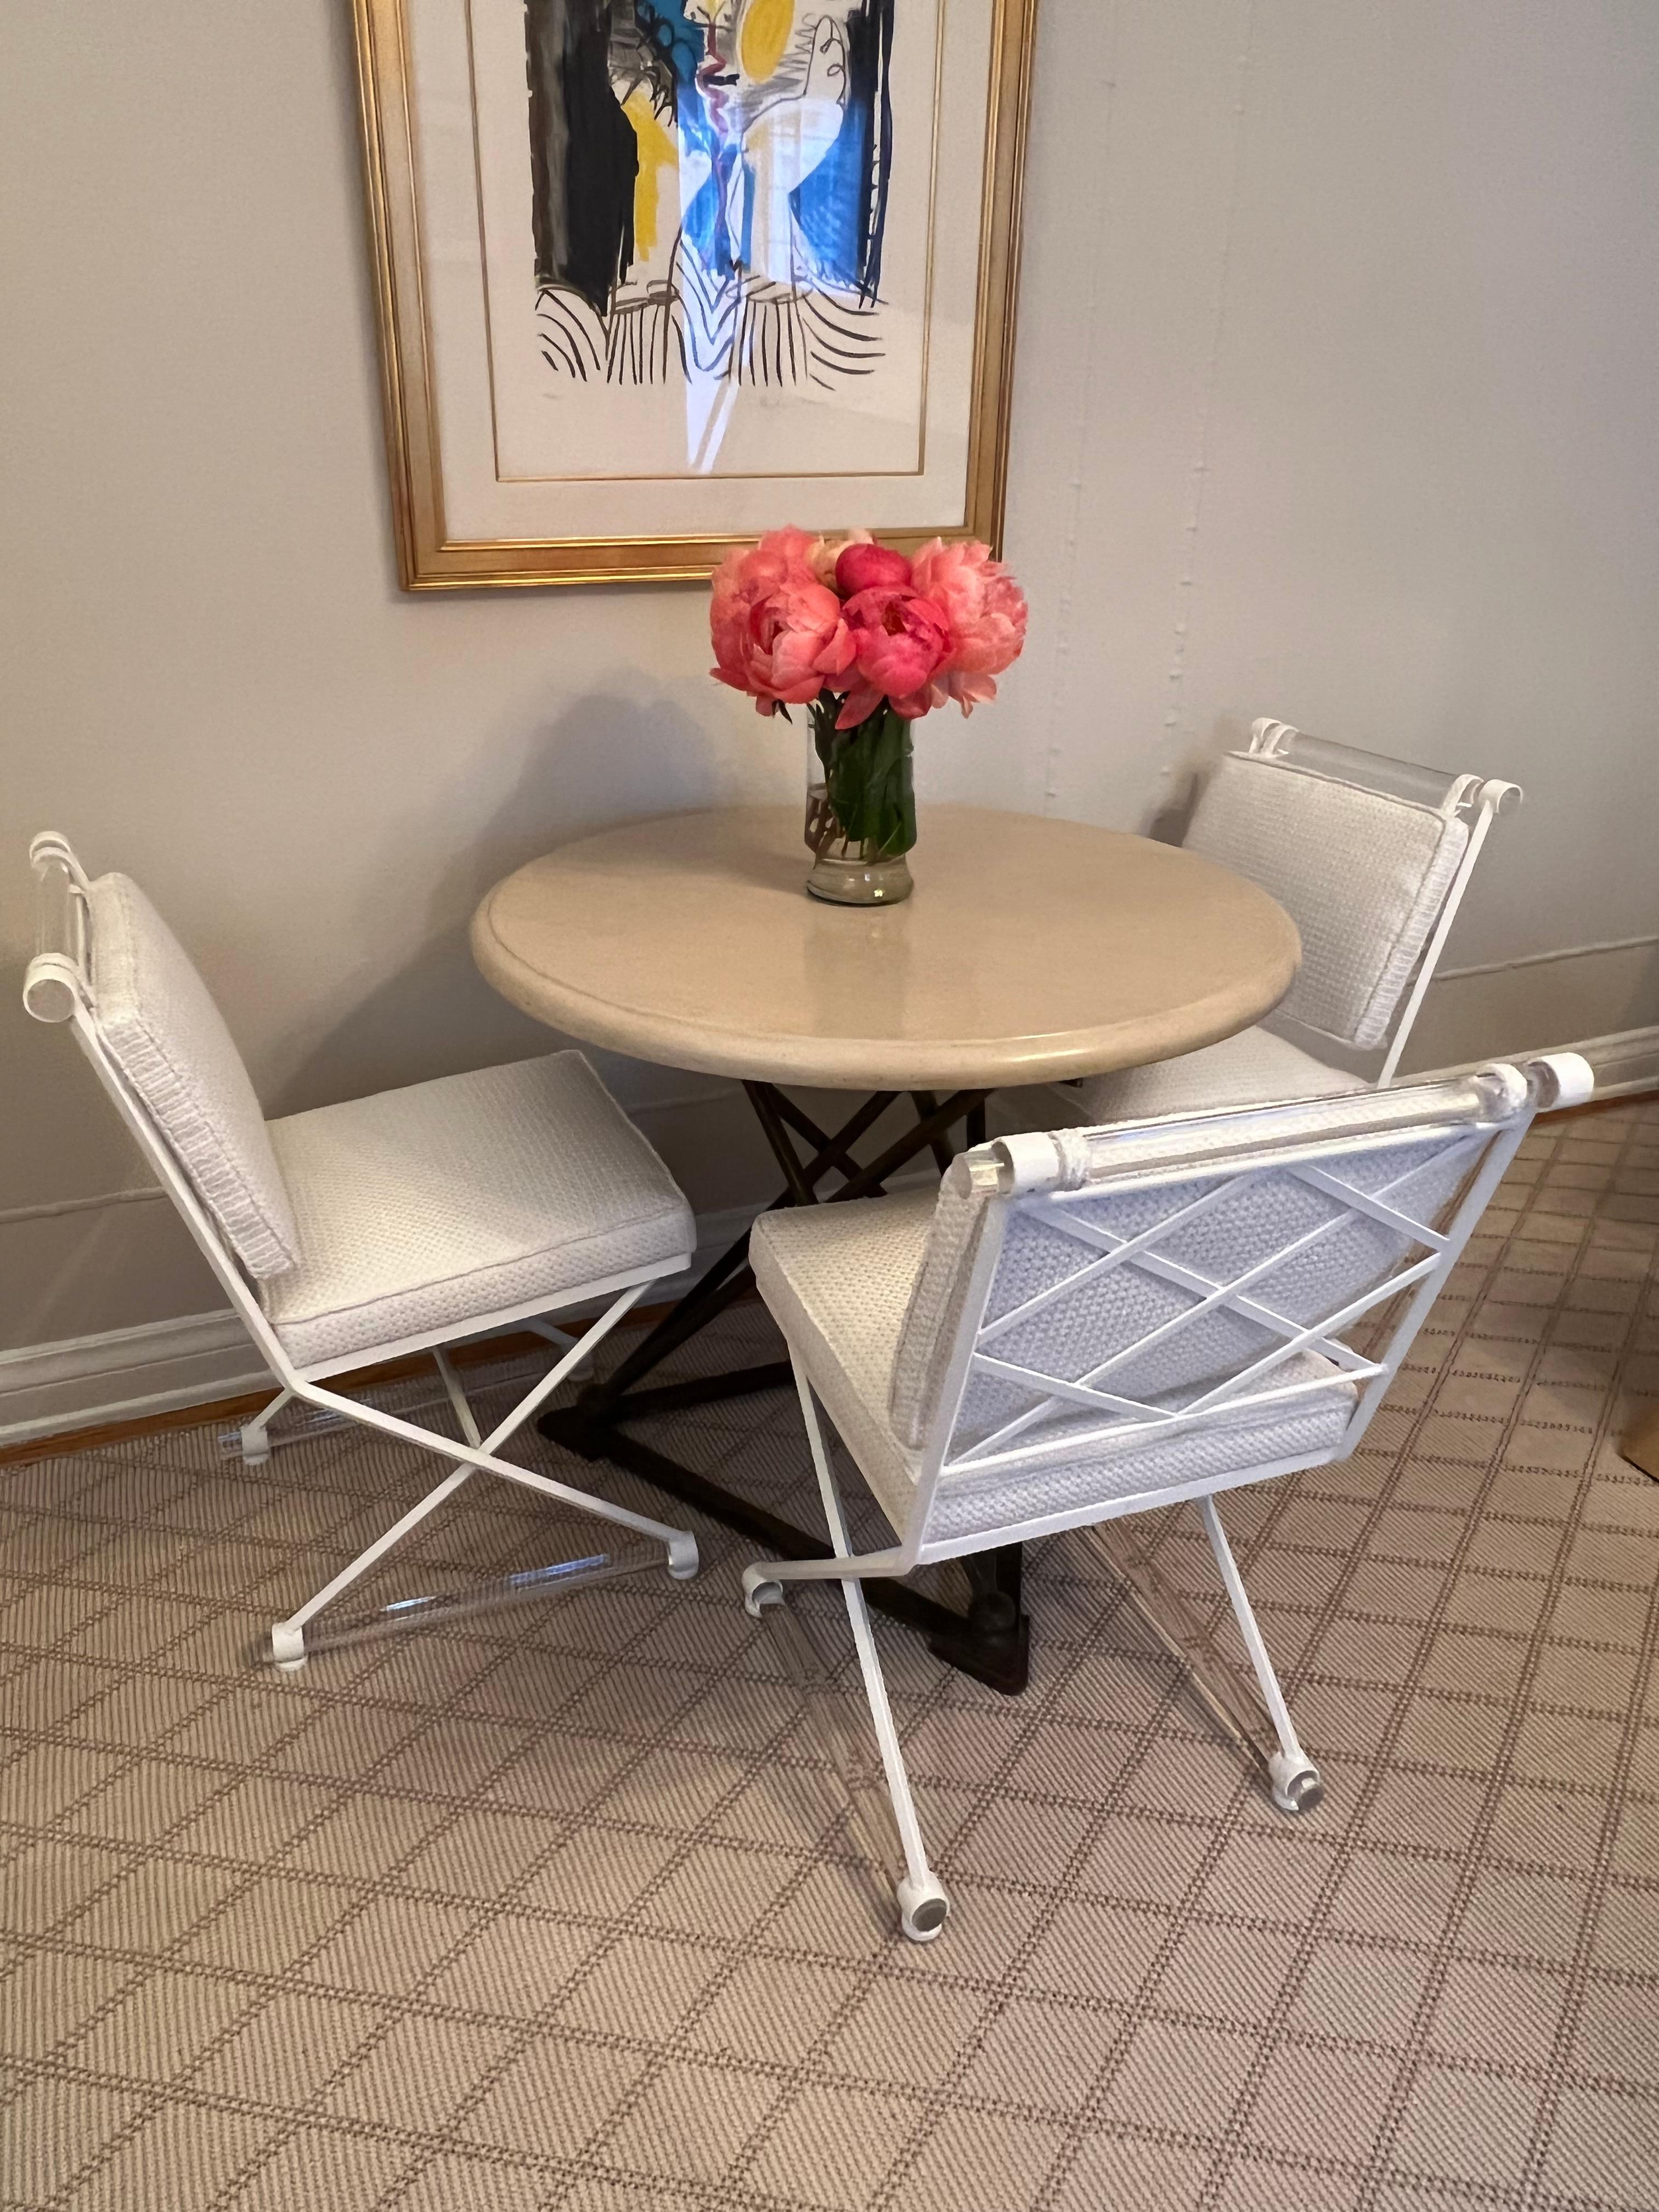 Cleo Baldon X-Form Chairs Restored with Acrylic Dowels and Sunbrella Upholstery For Sale 8